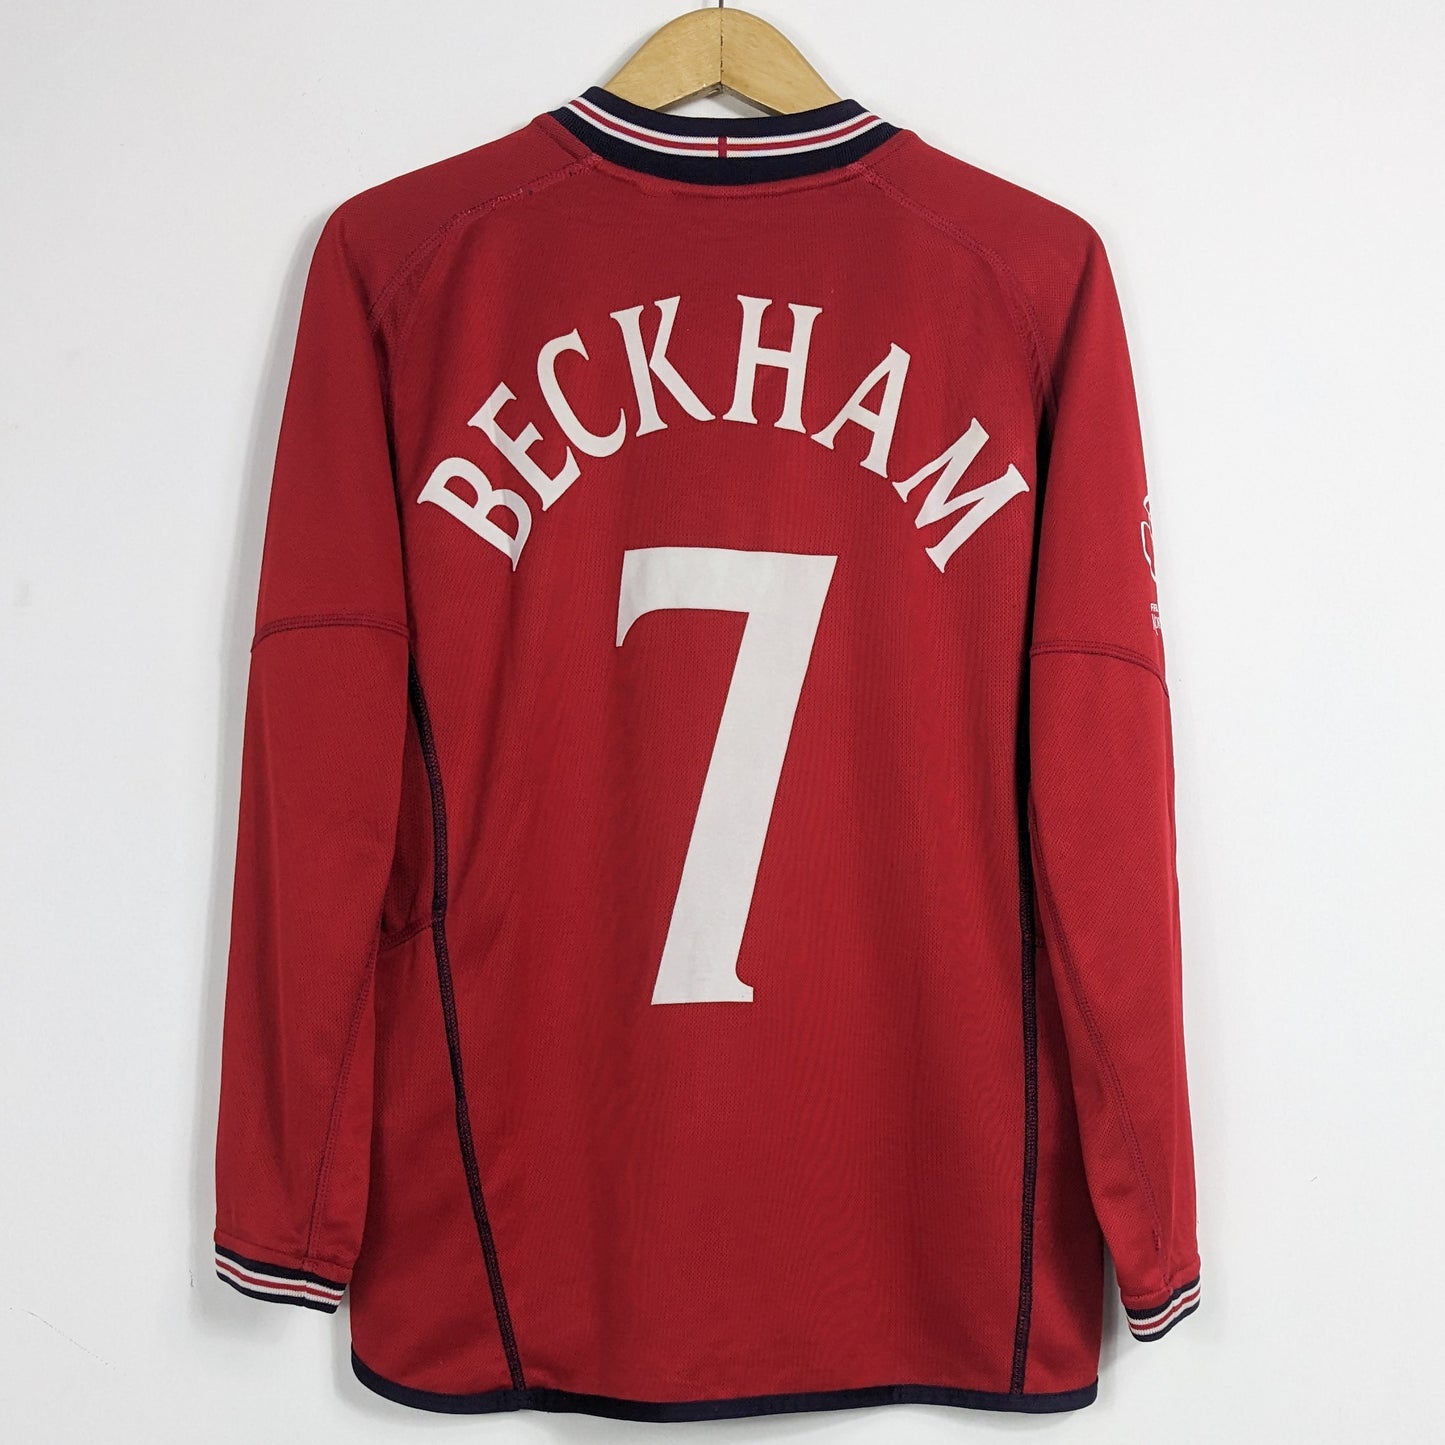 Authentic England 2002 Away - Beckham #7 Size M (Long Sleeve) (World Cup)